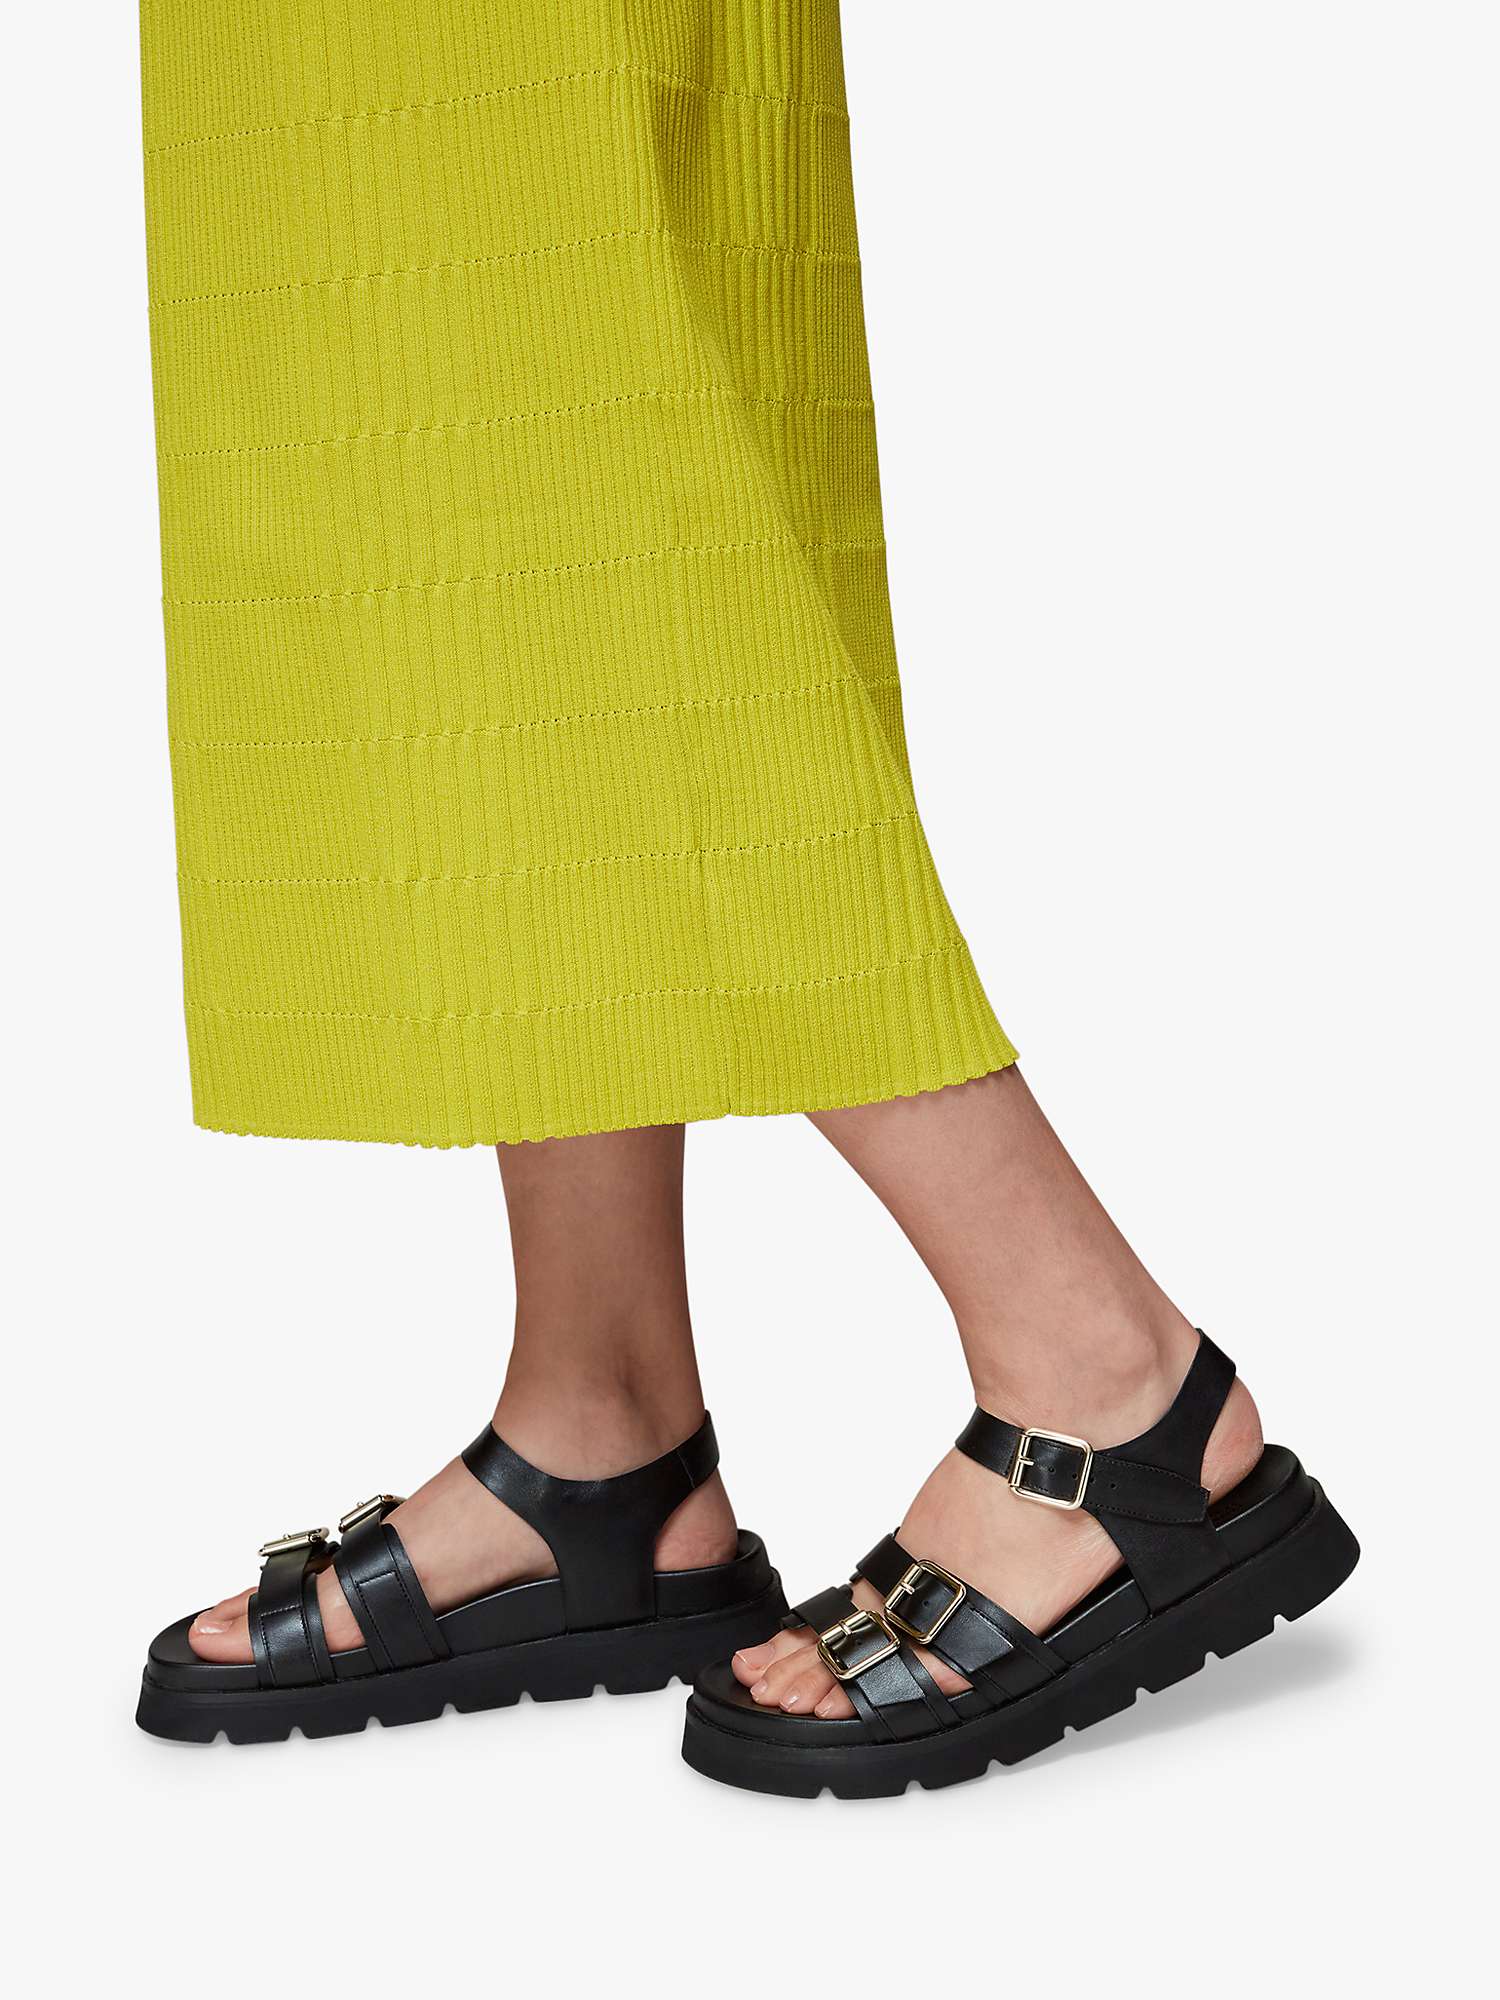 Buy Whistles Jemma Leather Triple Buckle Sandals Online at johnlewis.com